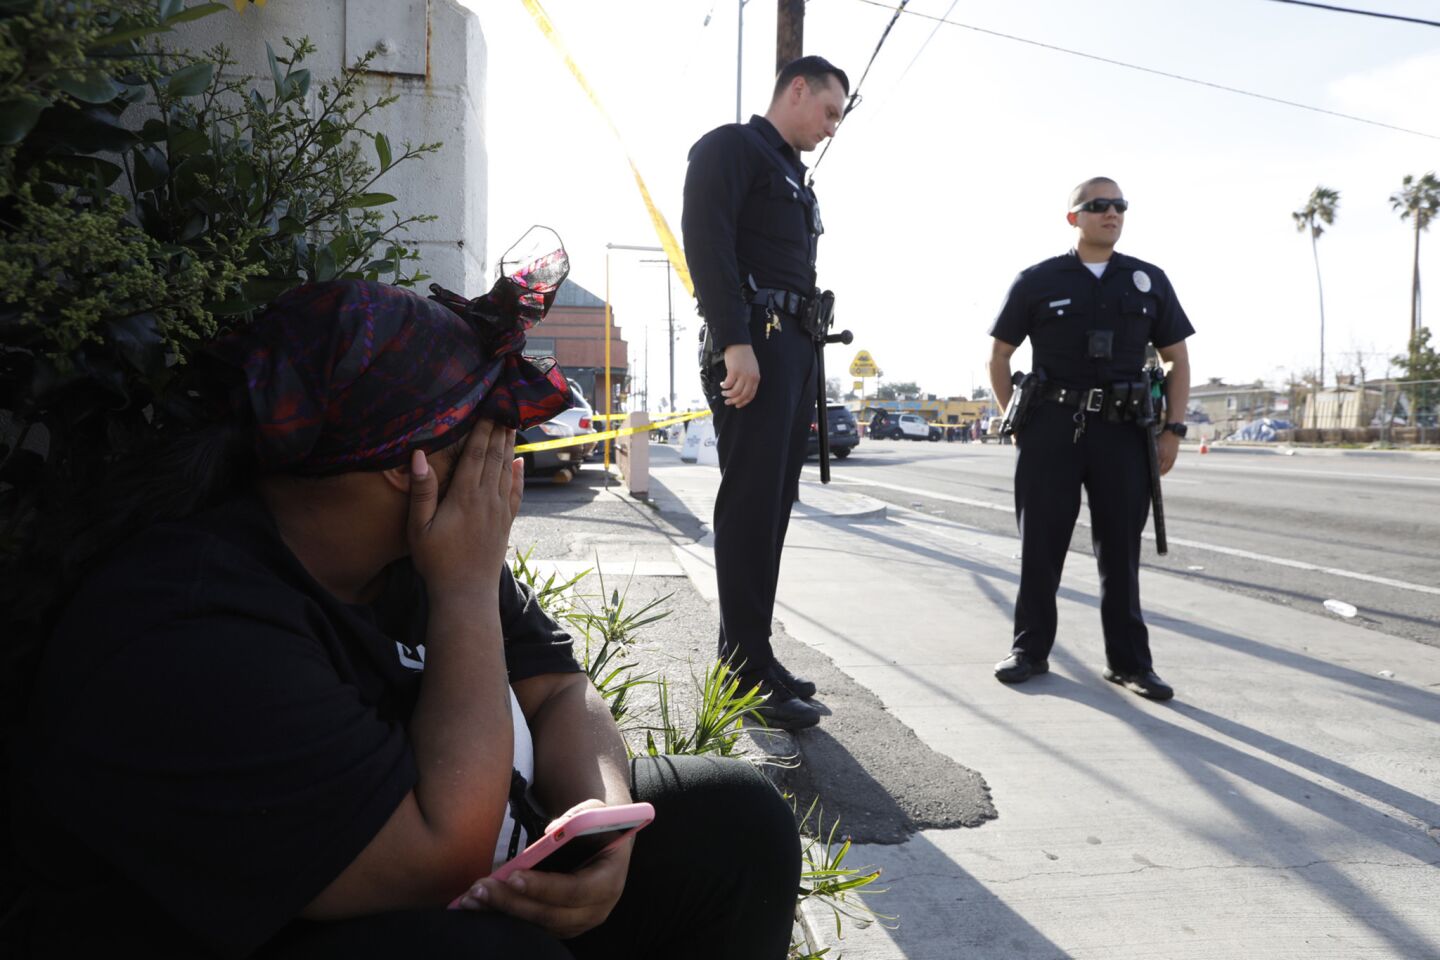 Takiya Taylor, 25, mourns the death of rapper Nipsey Hussle, who was killed in a shooting that wounded two other people outside Hussle's clothing store in South Los Angeles.